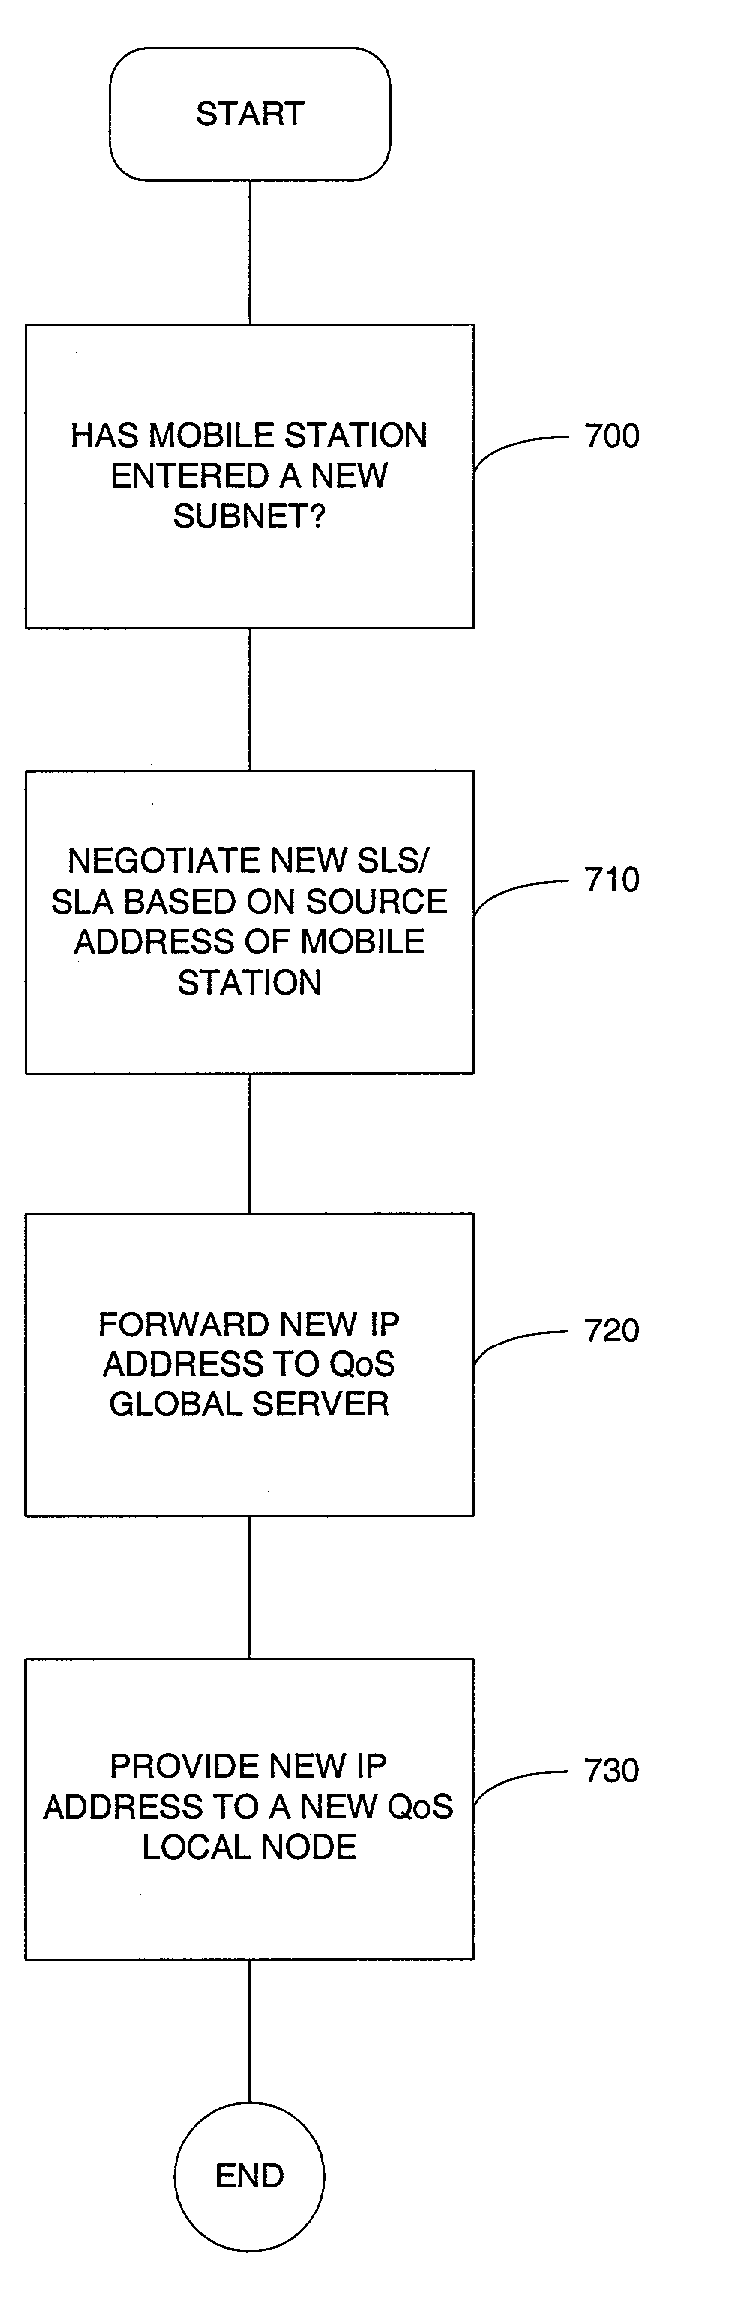 Method for distributing and conditioning traffic for mobile networks based on differentiated services